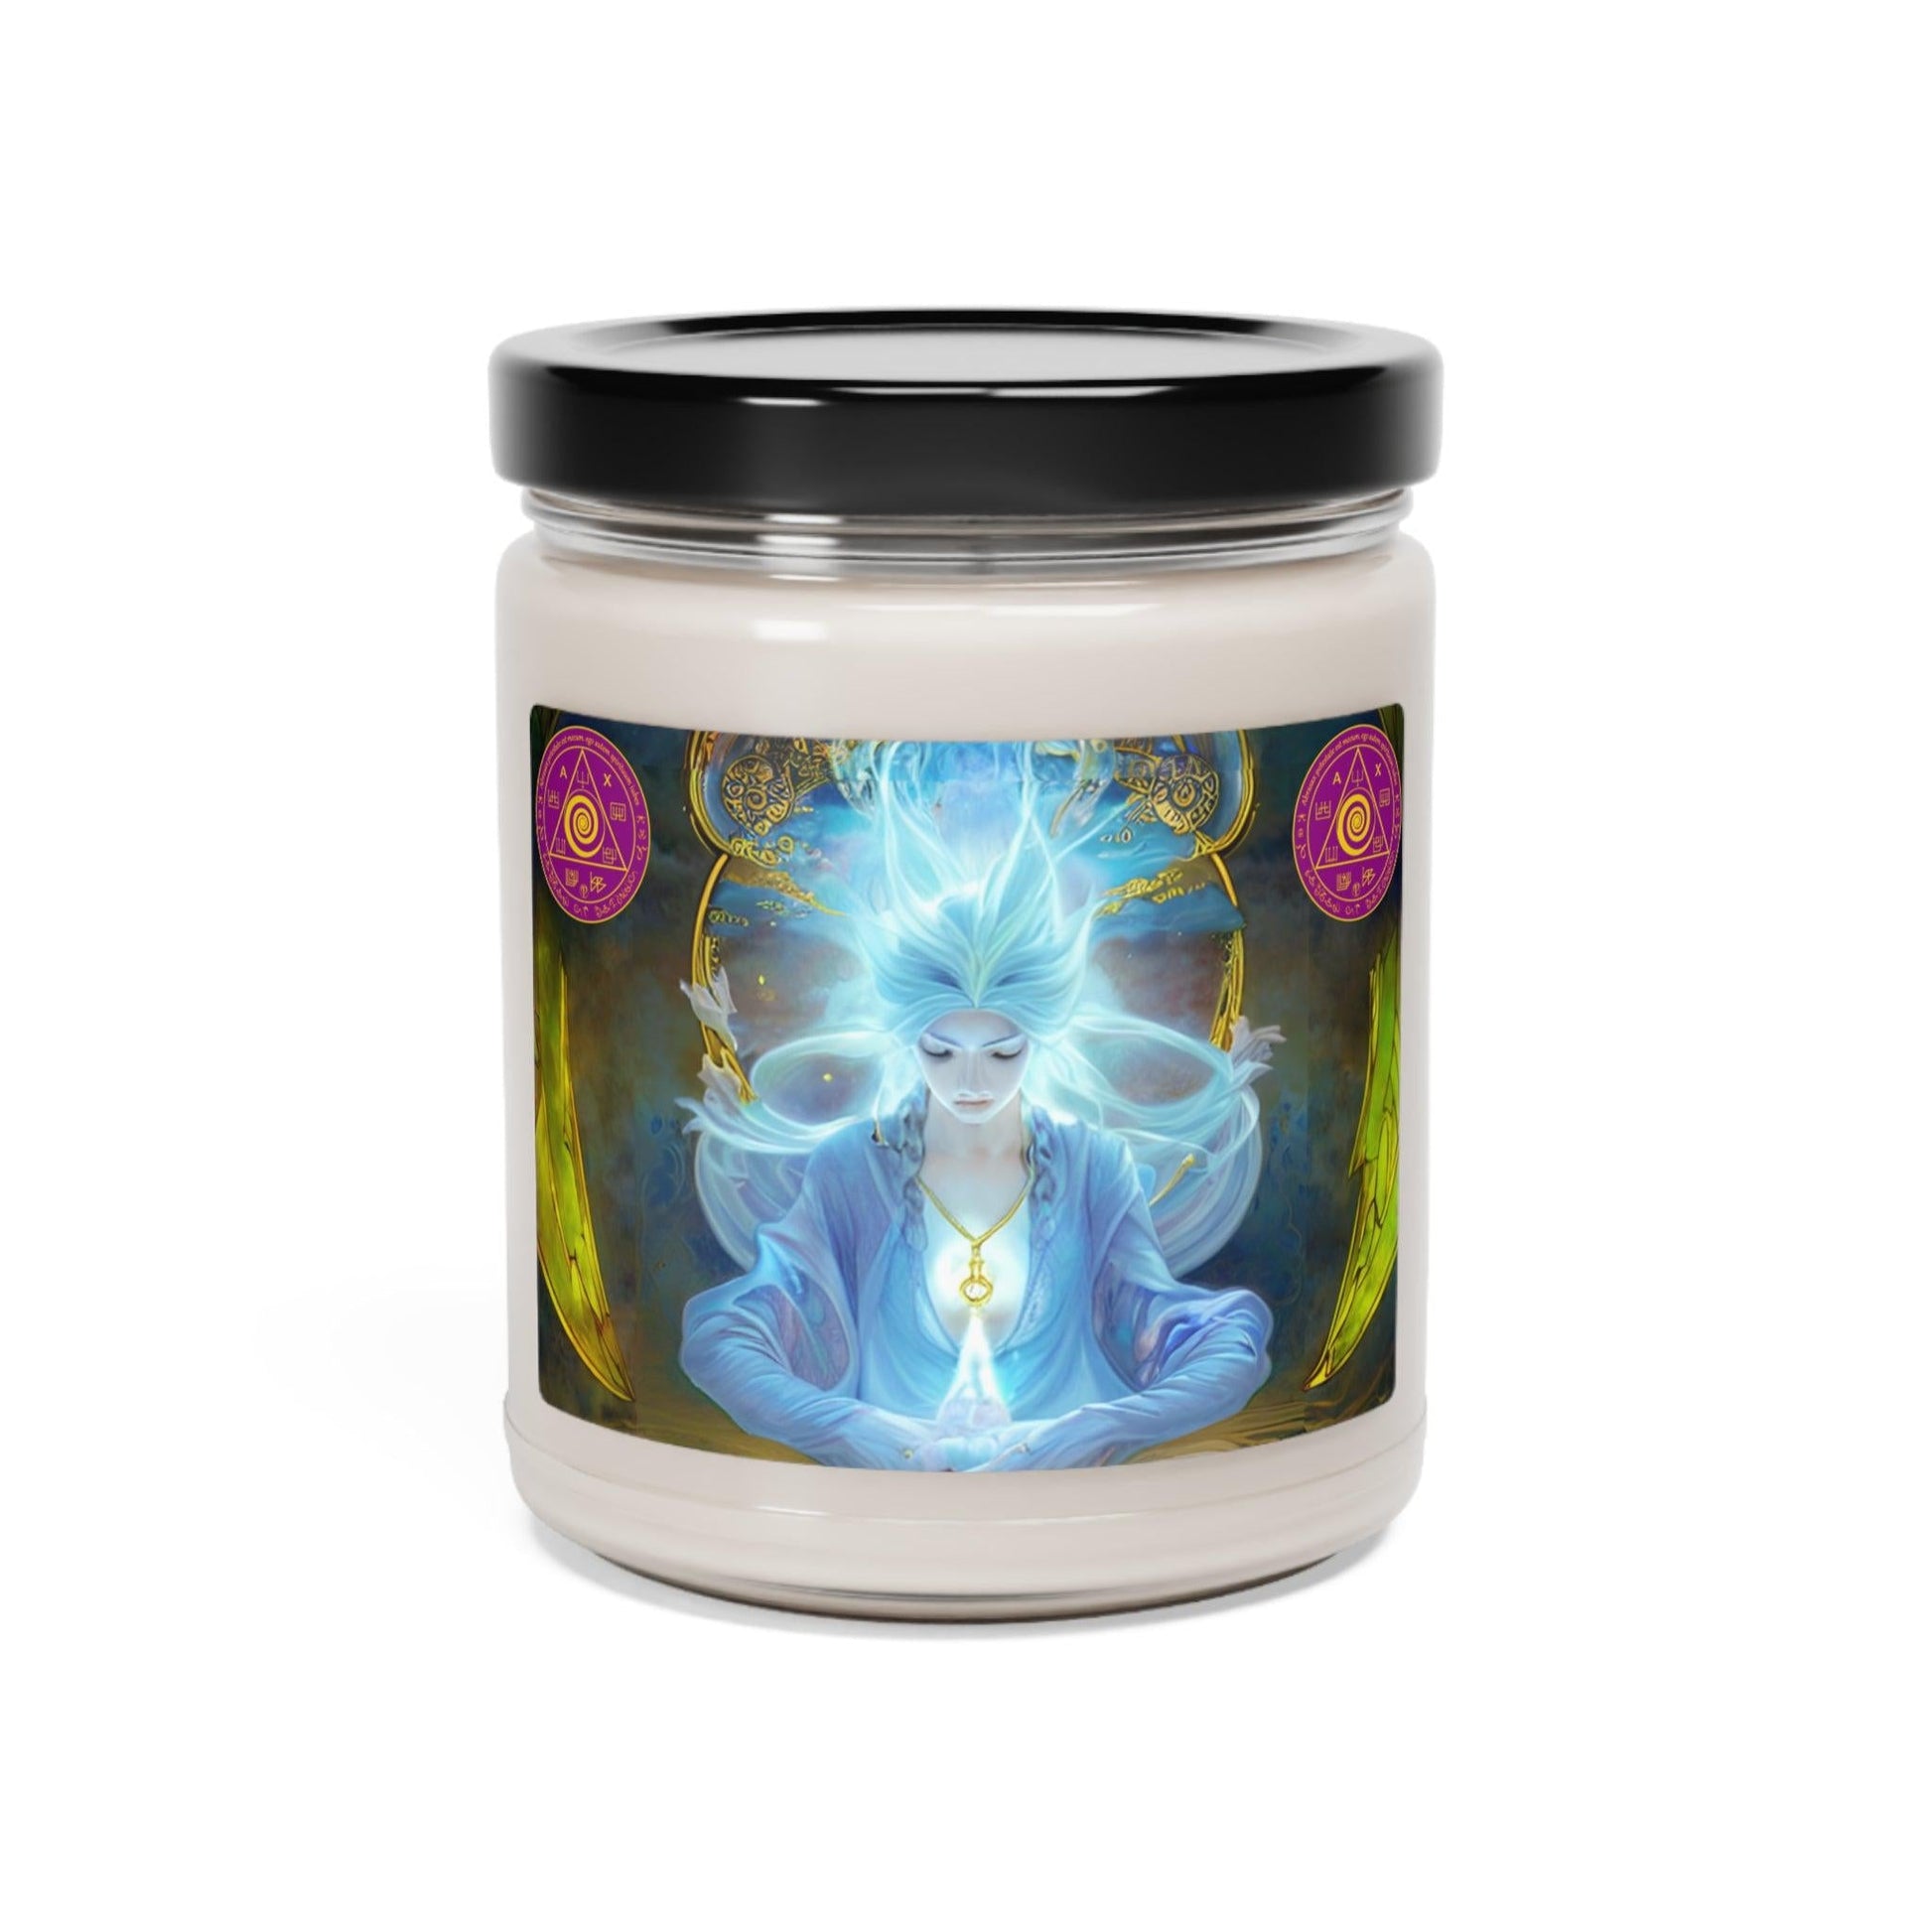 Olympic-Spirits-Cleansing-and-Protection-Scented-Soy-Candle-for-offerings-rituals-initiations-or-praying-and-meditation-6